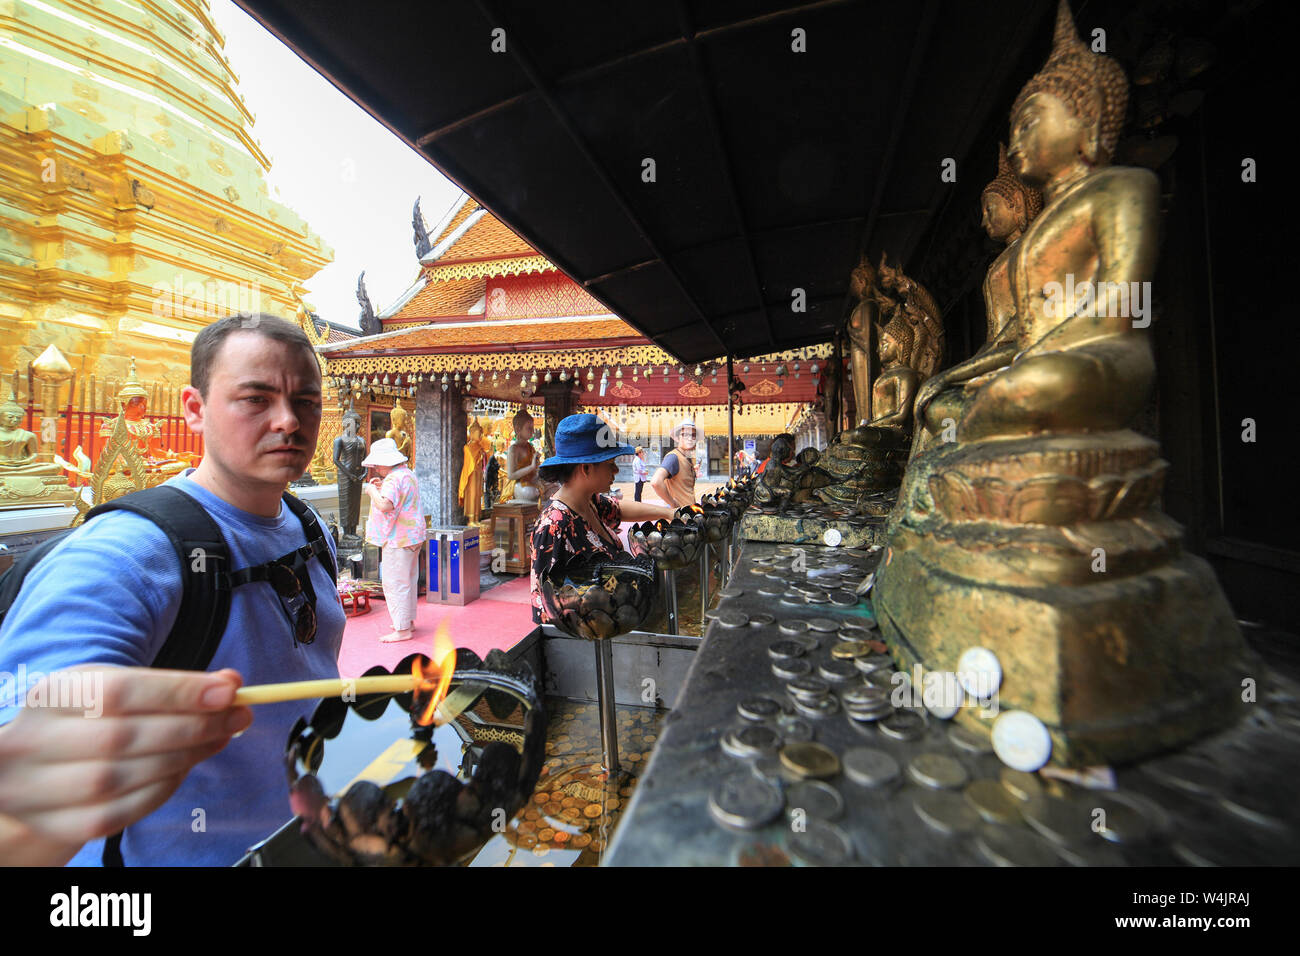 Visitors to the most famous of Thailand's temples, Wat Phra That Doi Suthep, light votive candles to honor Buddha in Chiang Mai, Thailand. Stock Photo